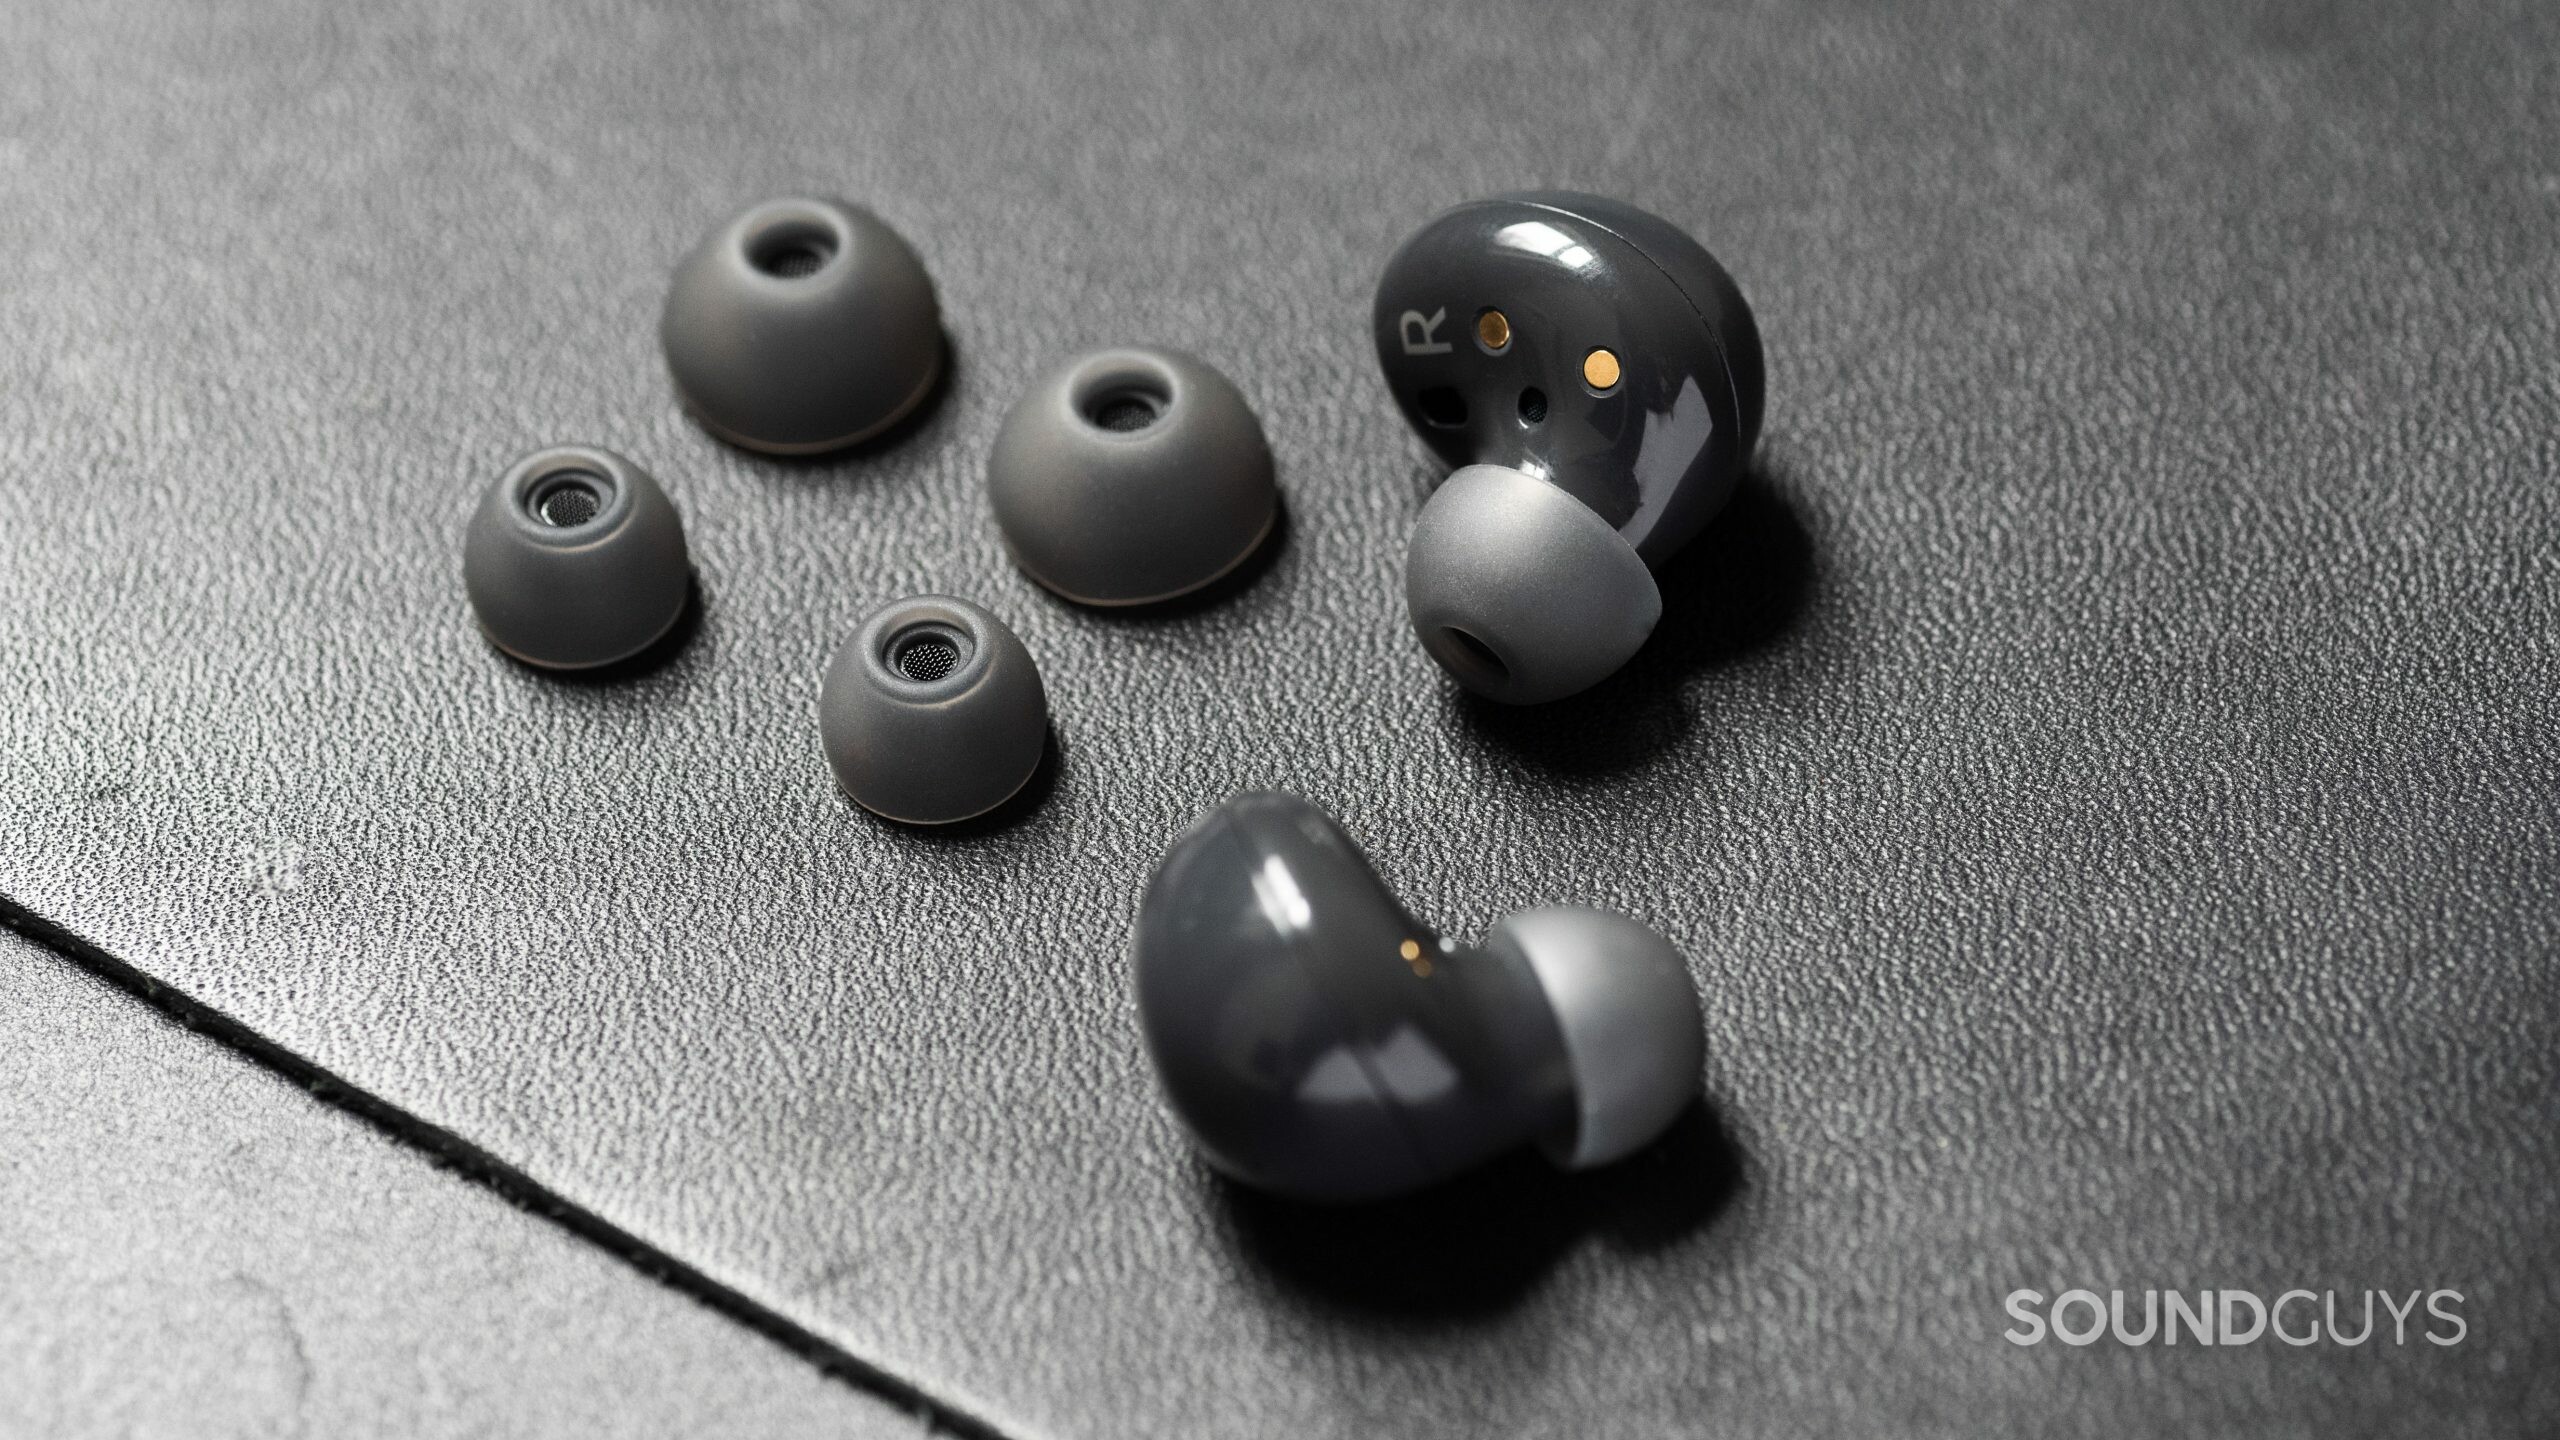 Samsung Galaxy Buds review: Solid earbuds for Android SoundGuys